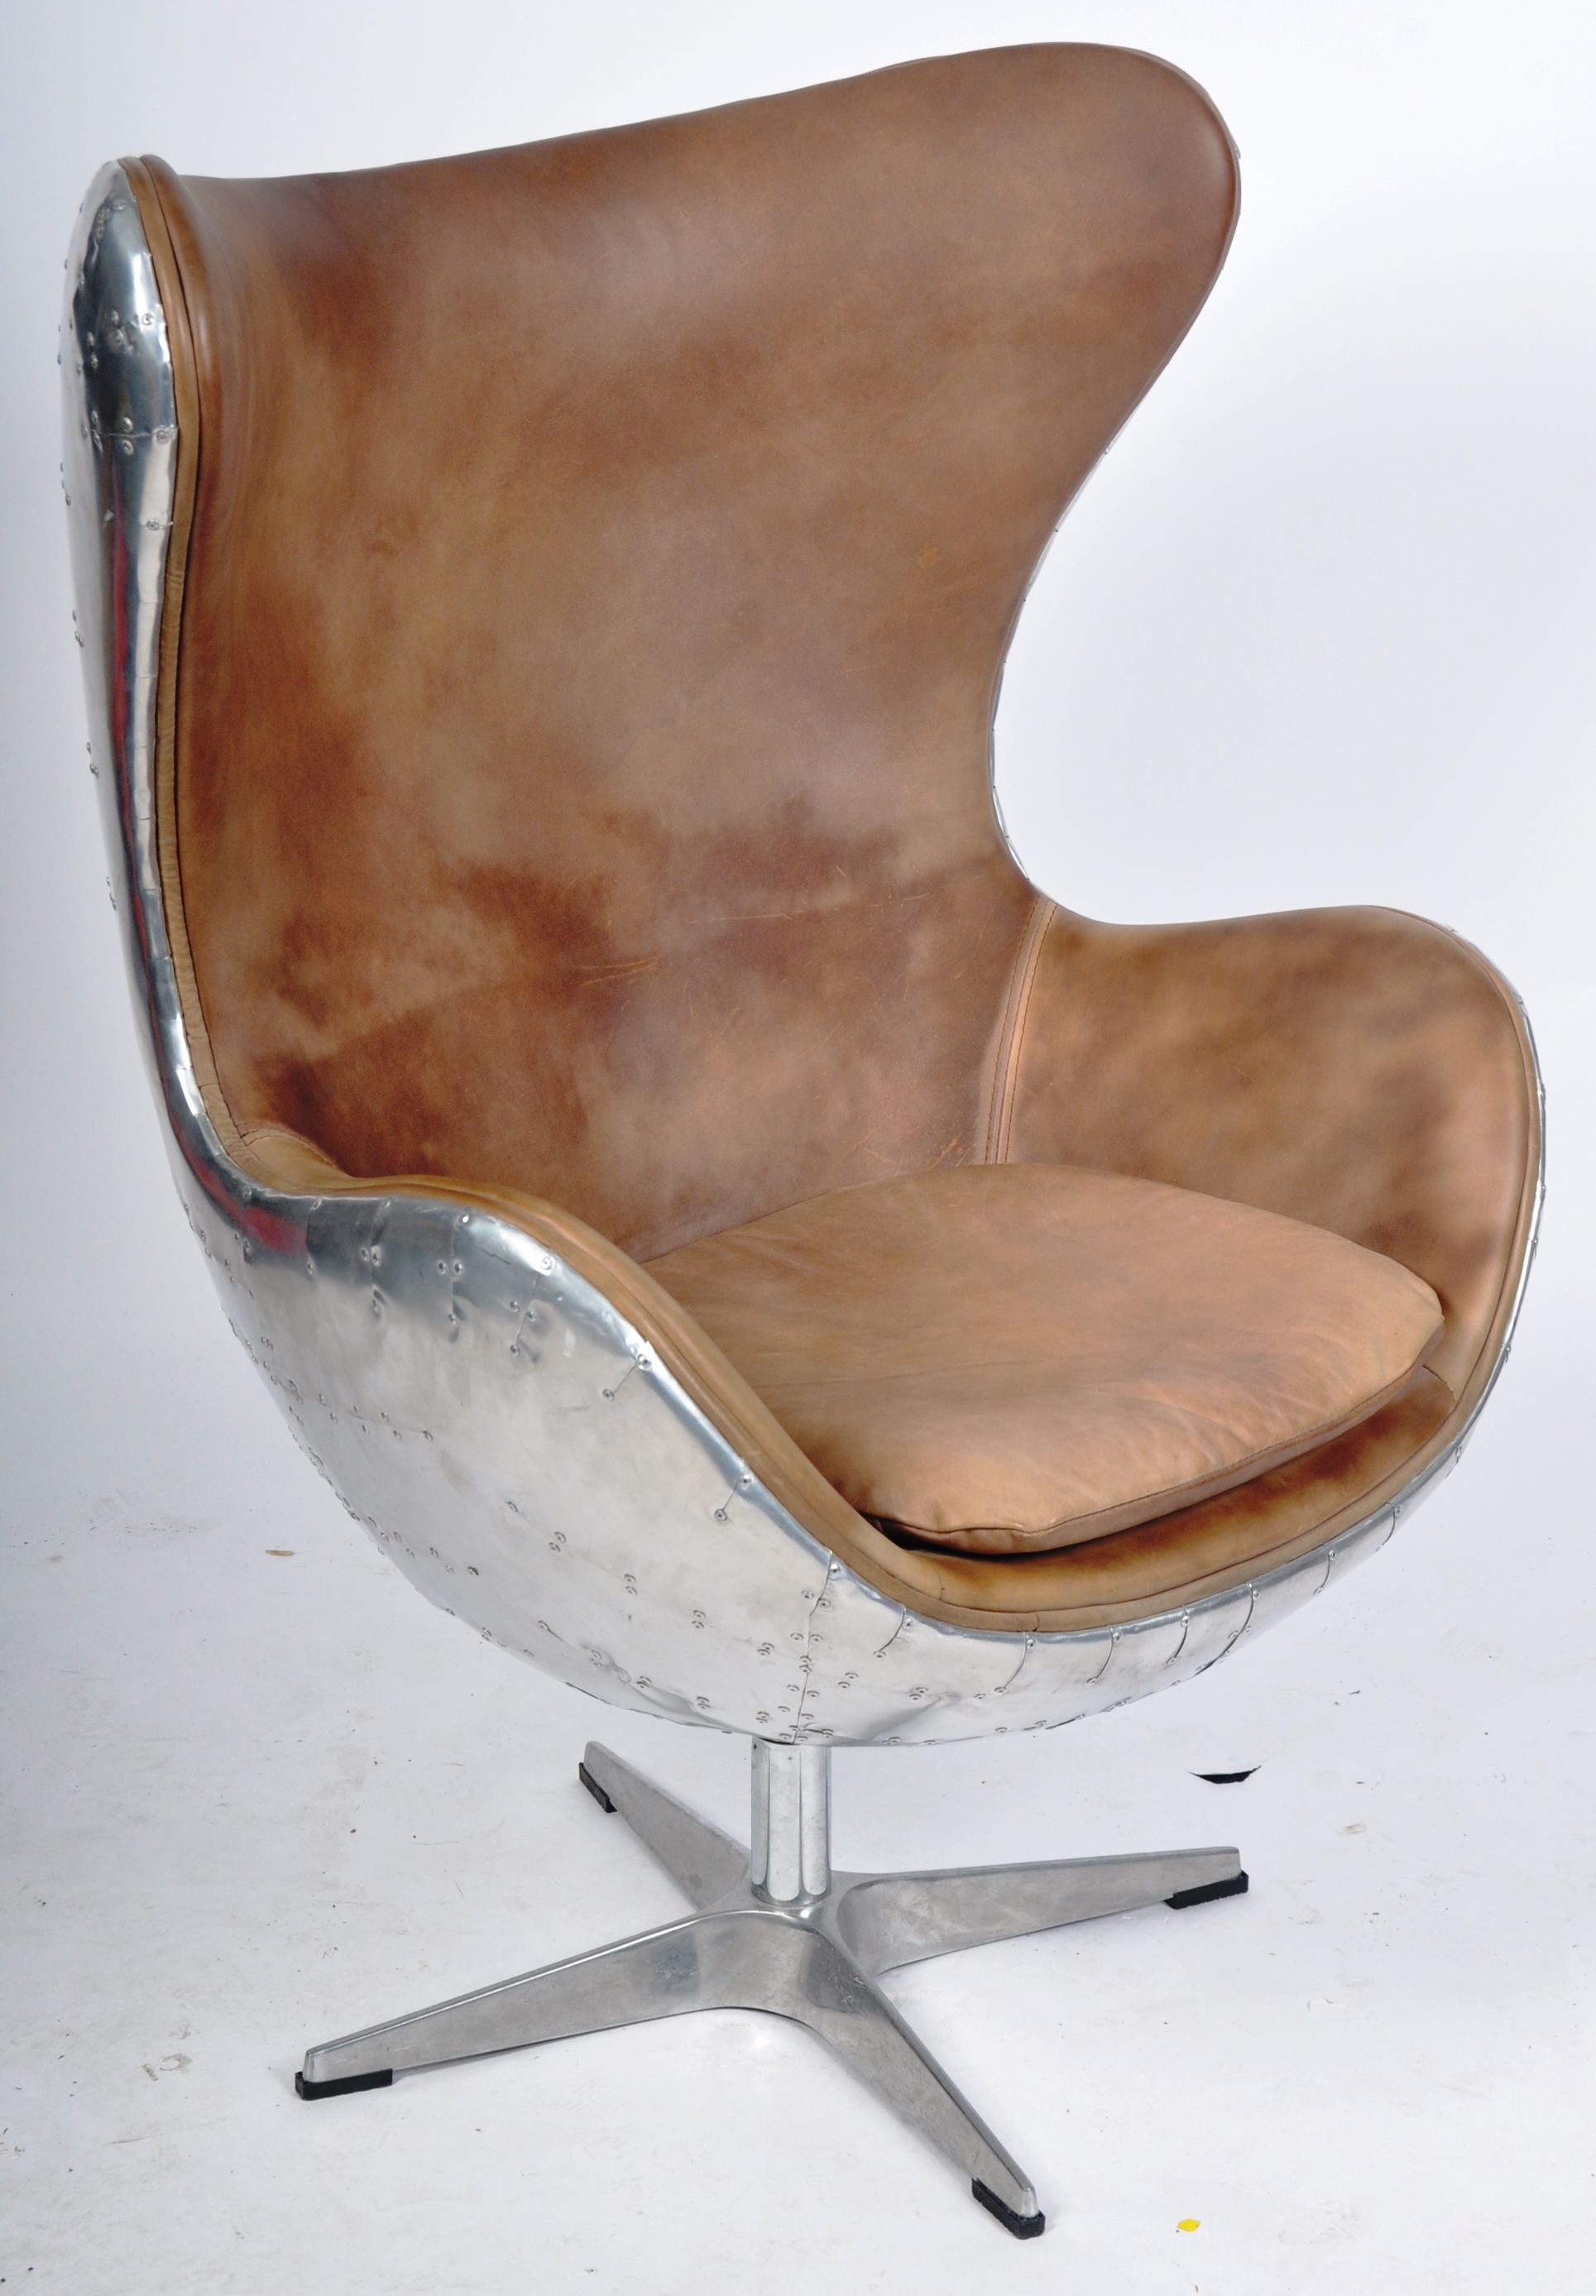 ANDREW MARTIN FURNITURE AVIATOR CHROME & LEATHER CHAIR - Image 2 of 9